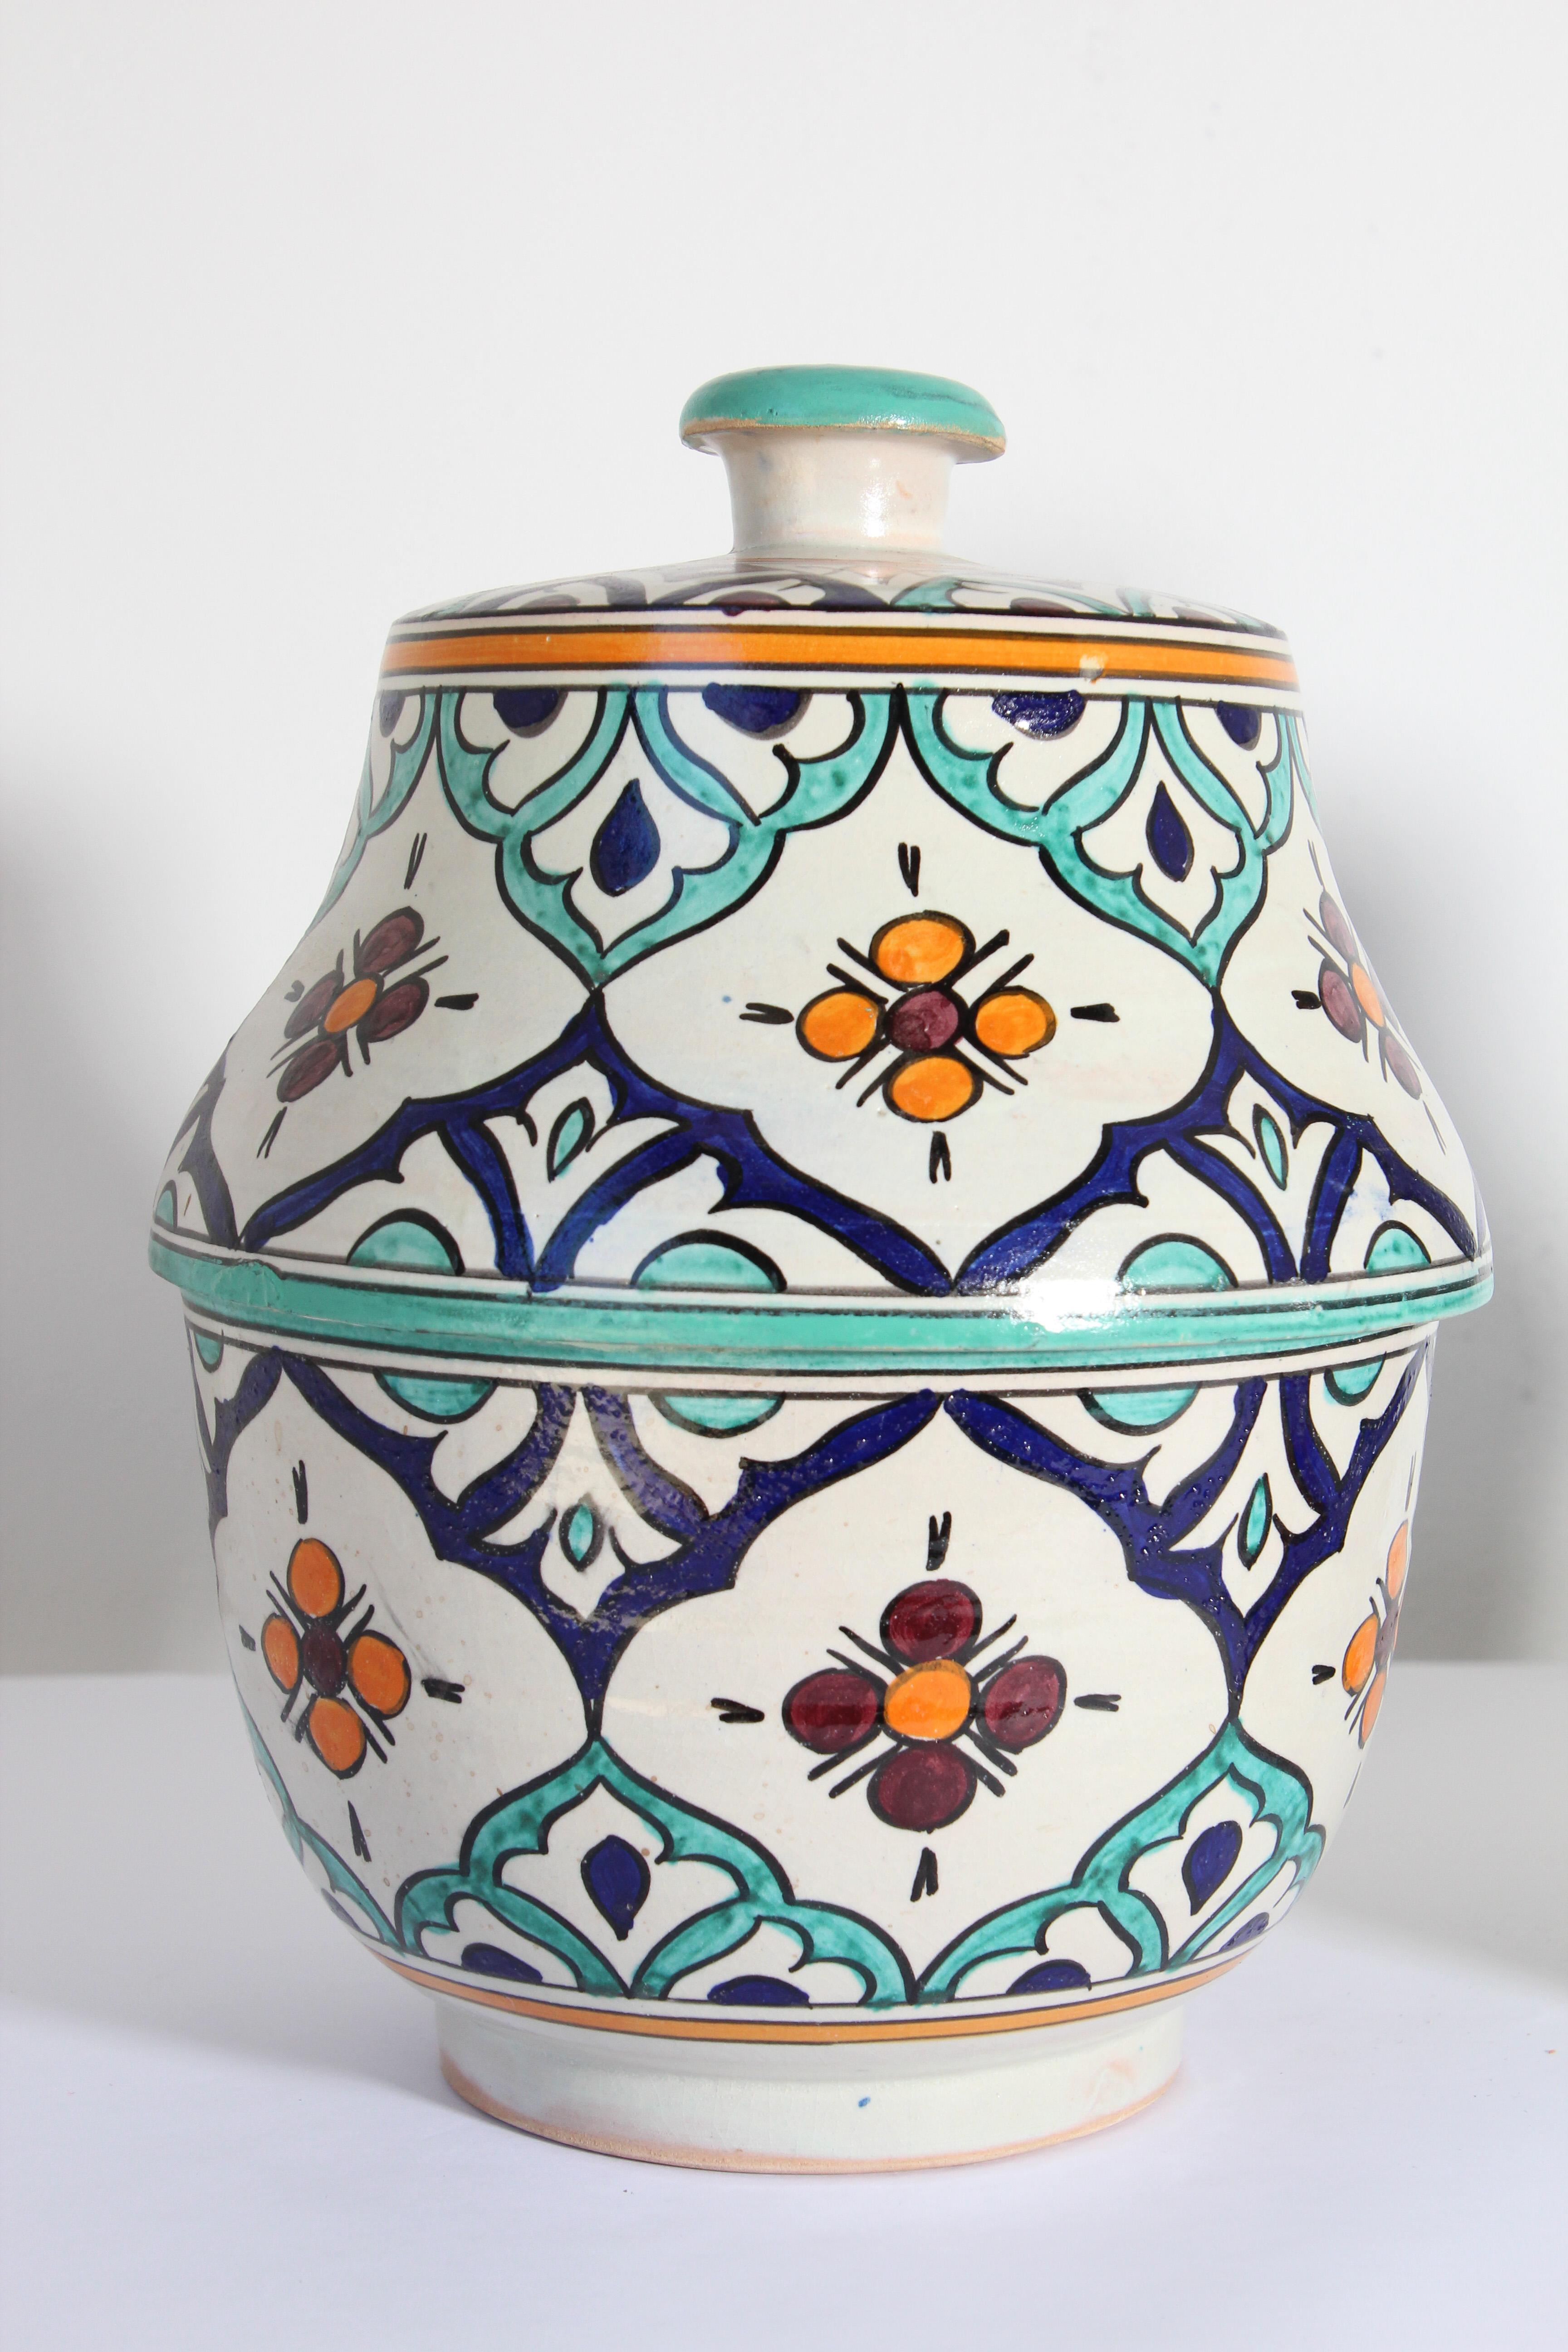 20th Century Moorish Ceramic Glazed Covered Urns Handcrafted in Fez Morocco For Sale